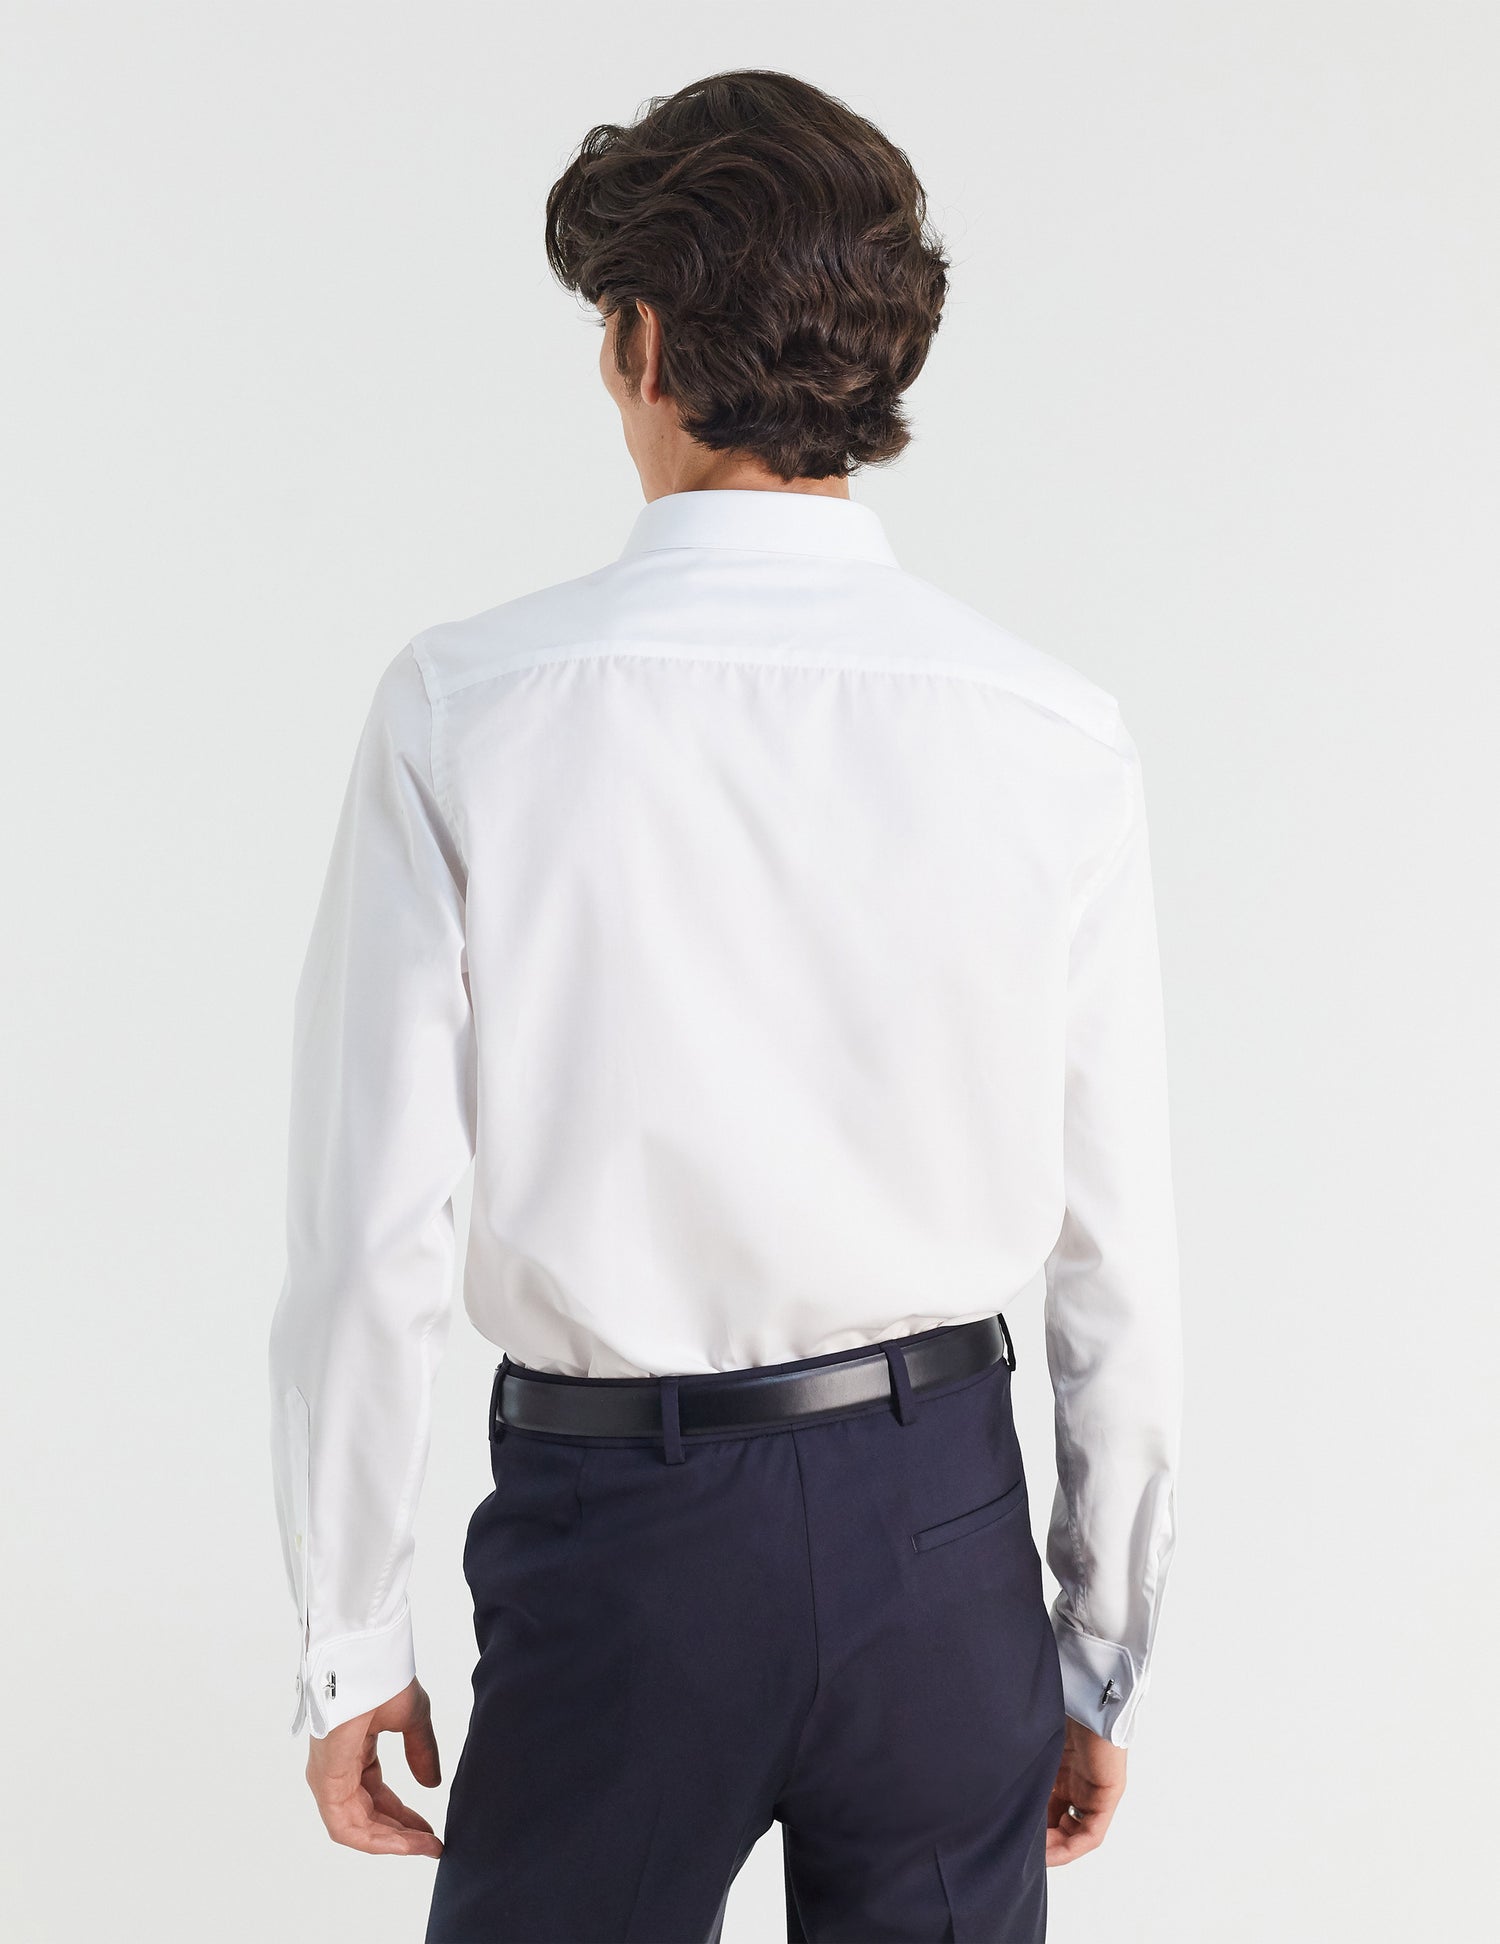 Semi-fitted white shirt - Poplin - Figaret Collar - French Cuffs#4